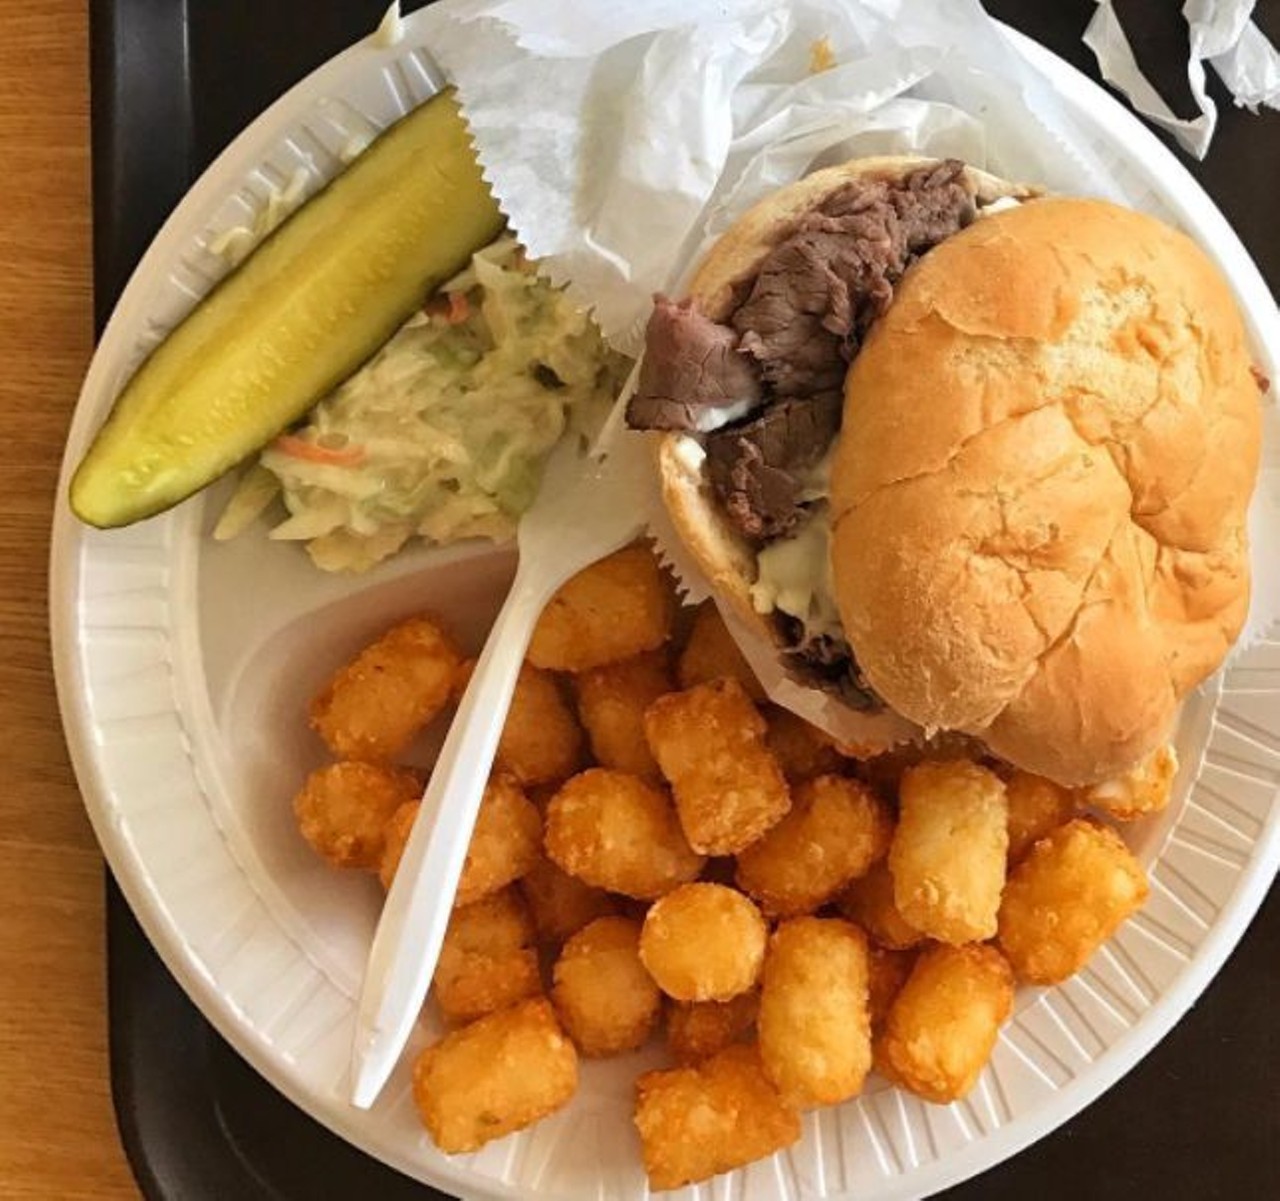 The Beefy King
An Orlando classic. Get a sandwich platter &#150; any Beefy King sandwich plus Beefy Spuds (tater tots), coleslaw and a kosher dill pickle for less than a 10-spot &#150; and you&#146;ll probably have enough left over for a small milkshake.
424 N. Bumby Ave., 407-894-2241, $
Photo via munchies/Instagram